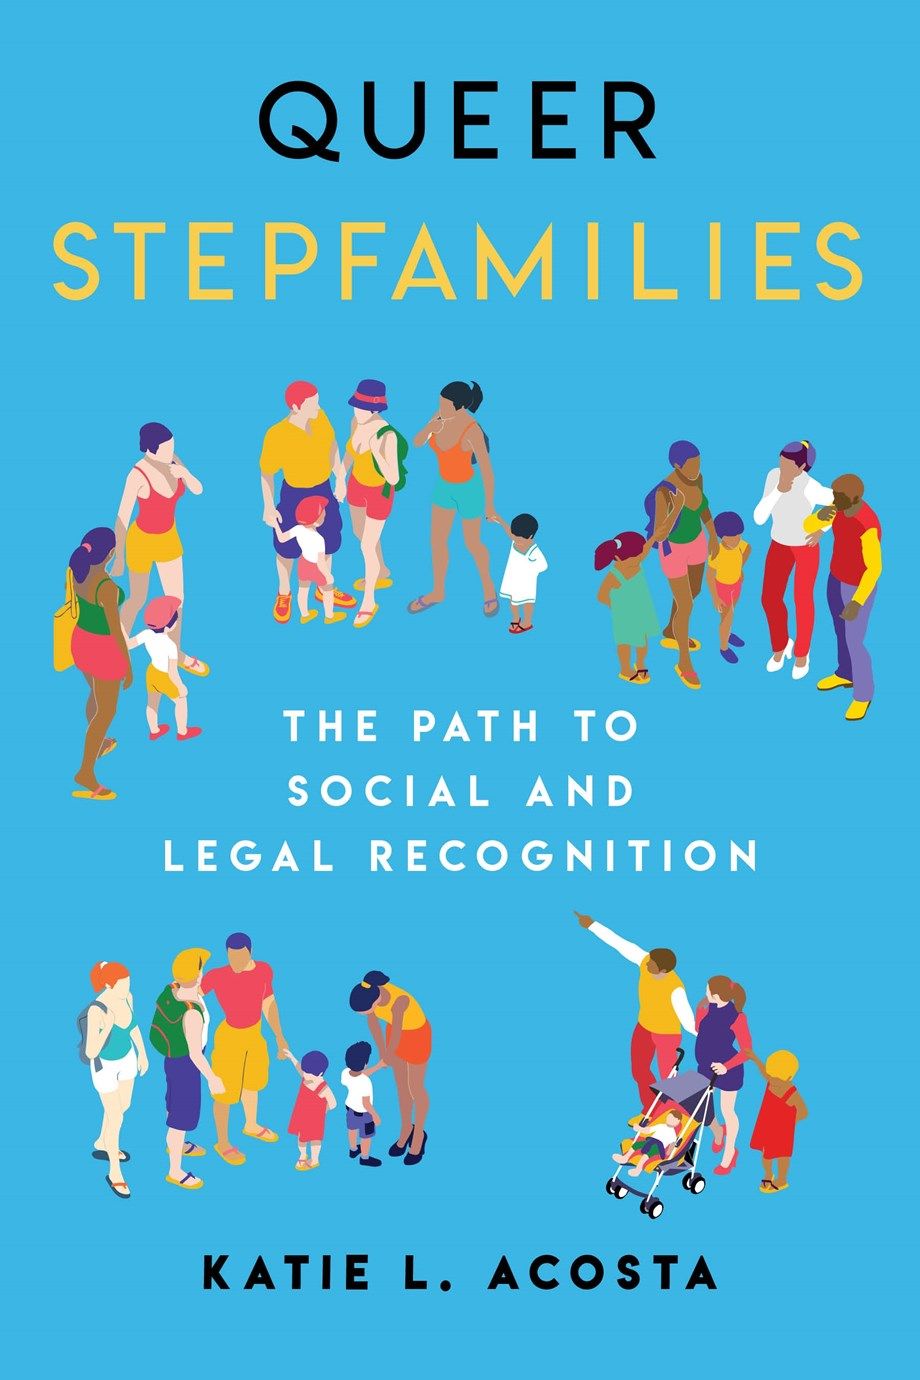 Book cover of Queer Stepfamilies